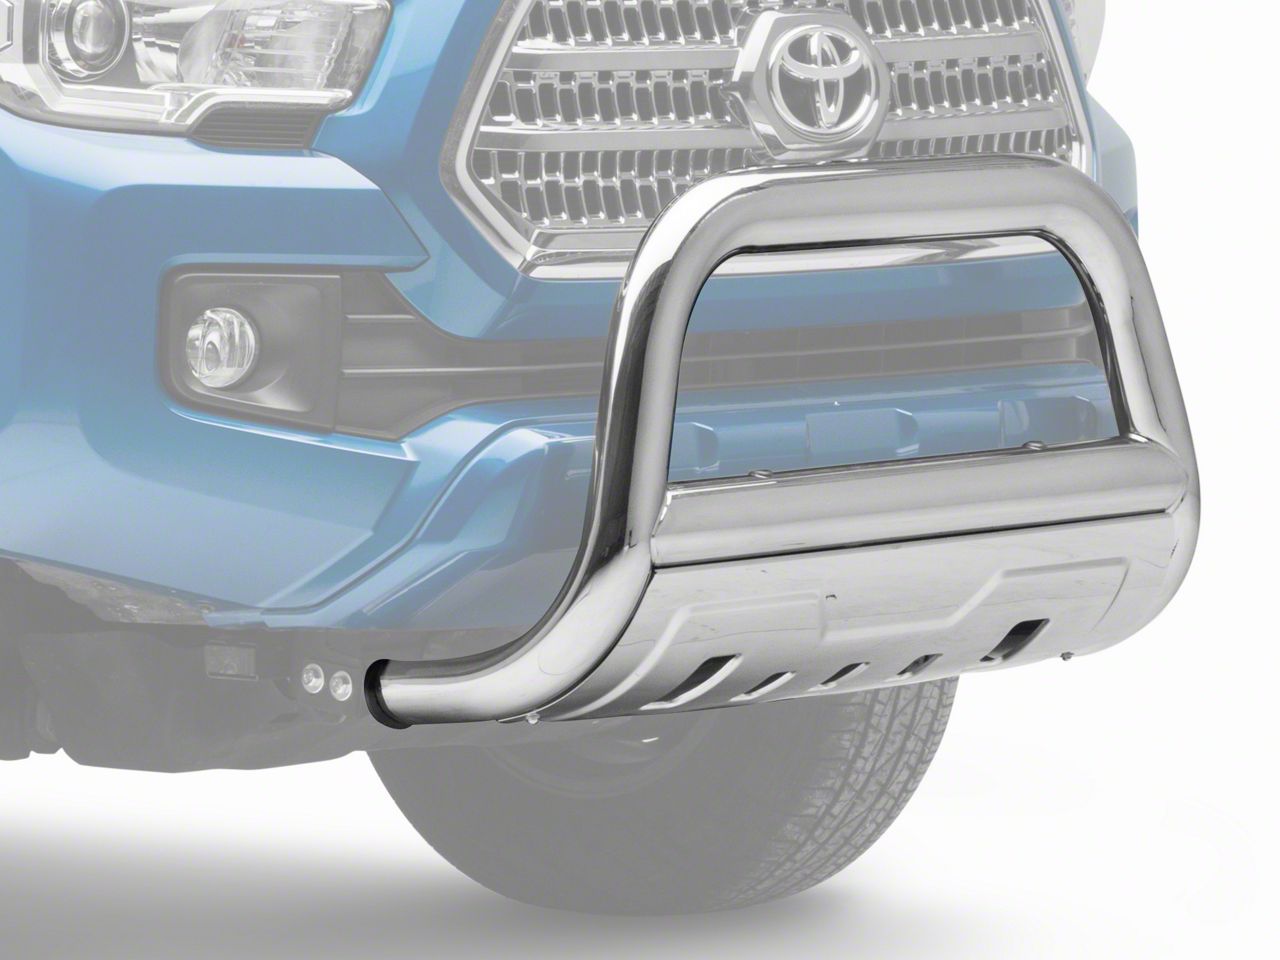 Barricade Tacoma 3.5 in. Oval Bull Bar w/ Skid Plate - Stainless Steel ...